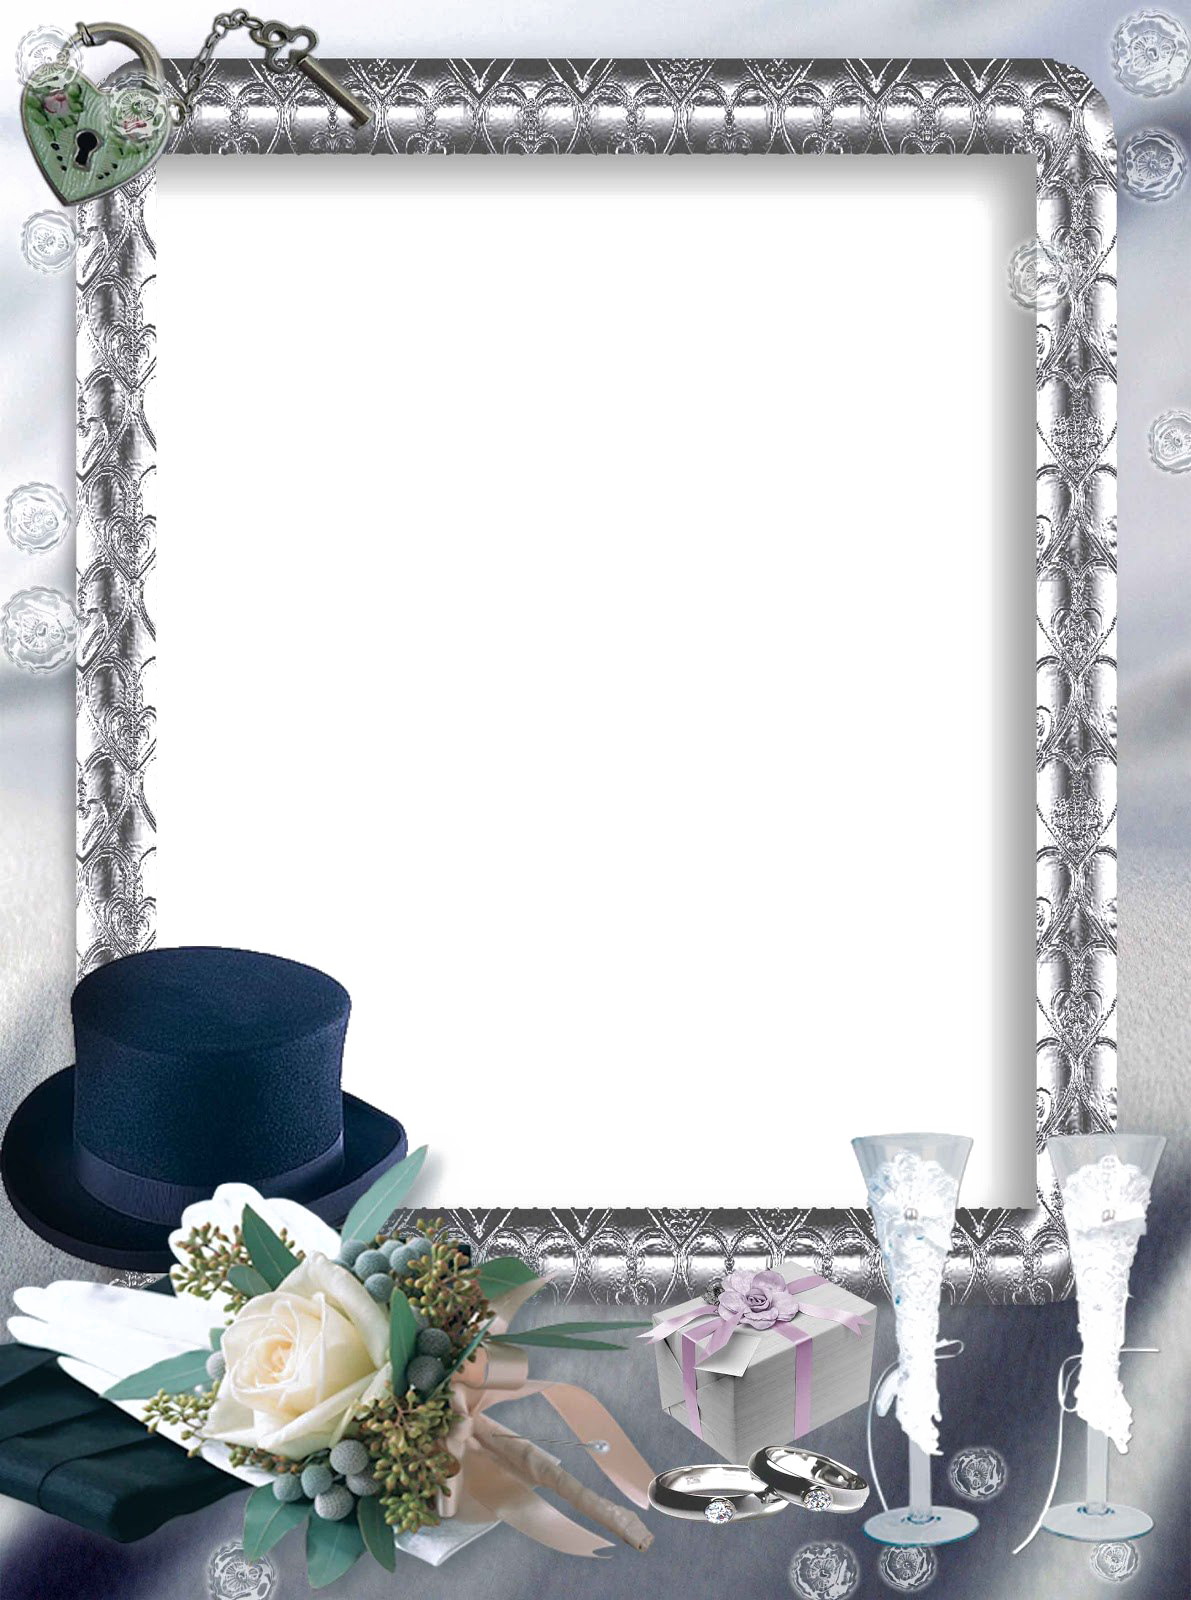 wedding invitation, borders, collage Png Background Full HD 1080p